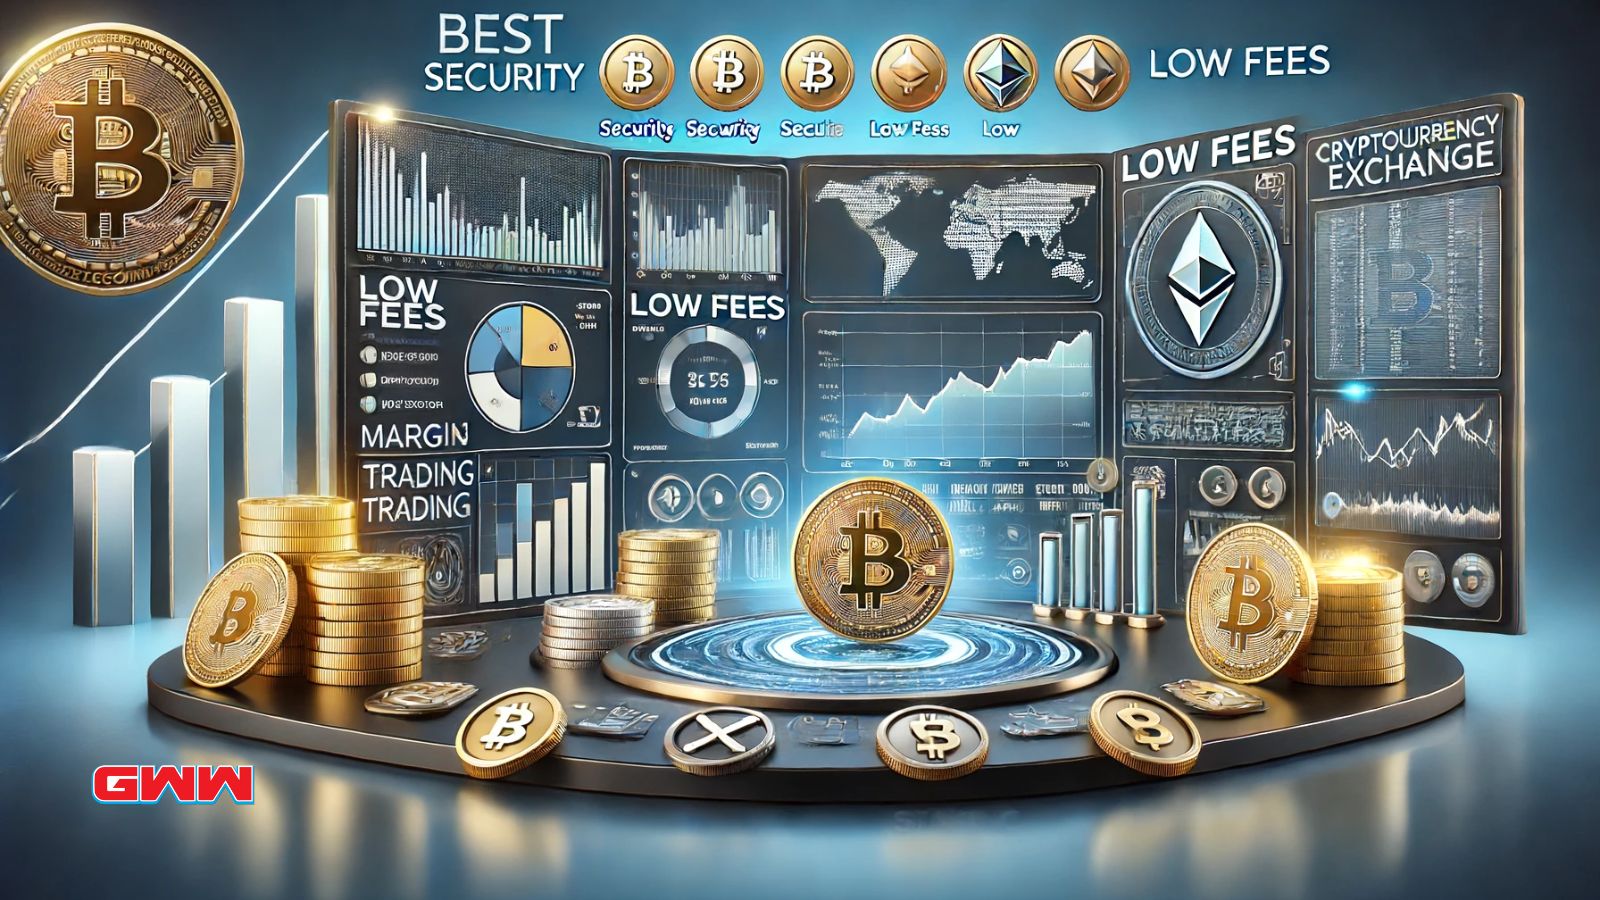 Best security and low fees features on a top 10 crypto exchange platform